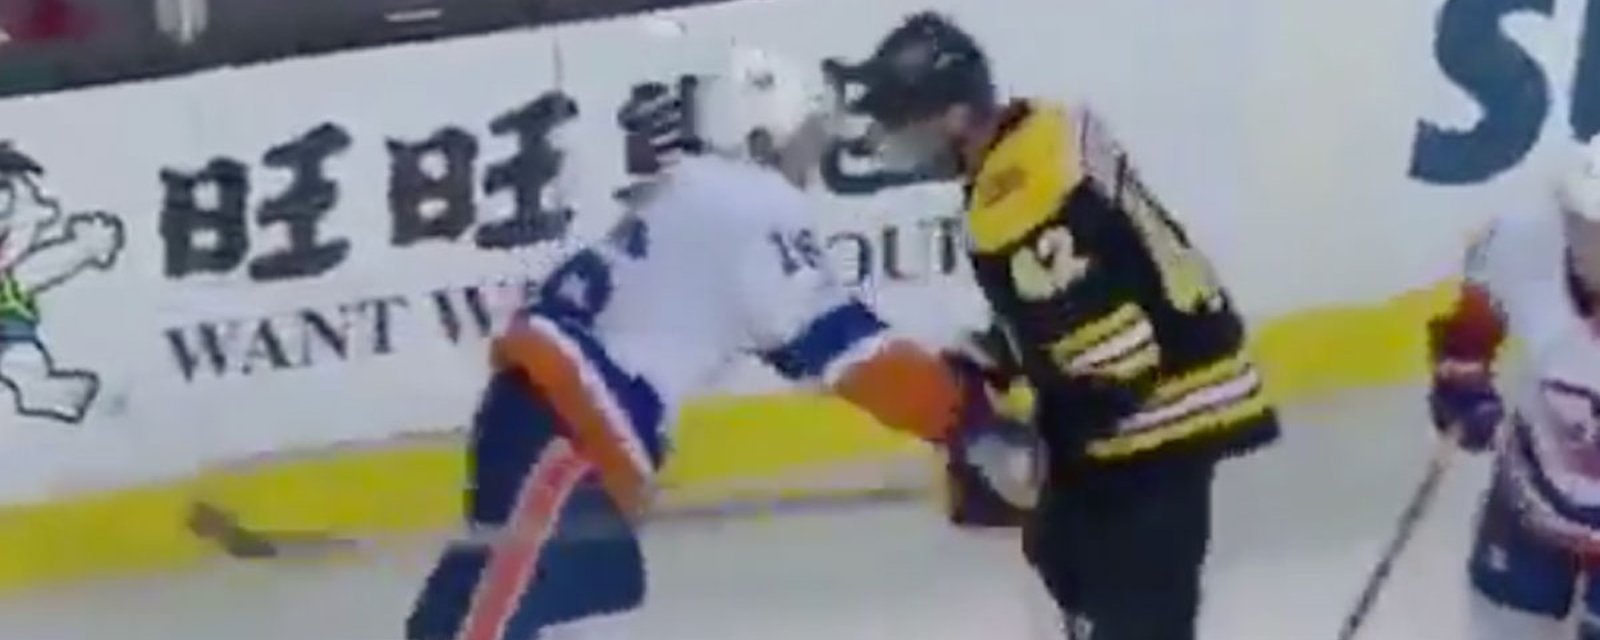 ​Breaking: Backes ejected for head-butting Ladd!